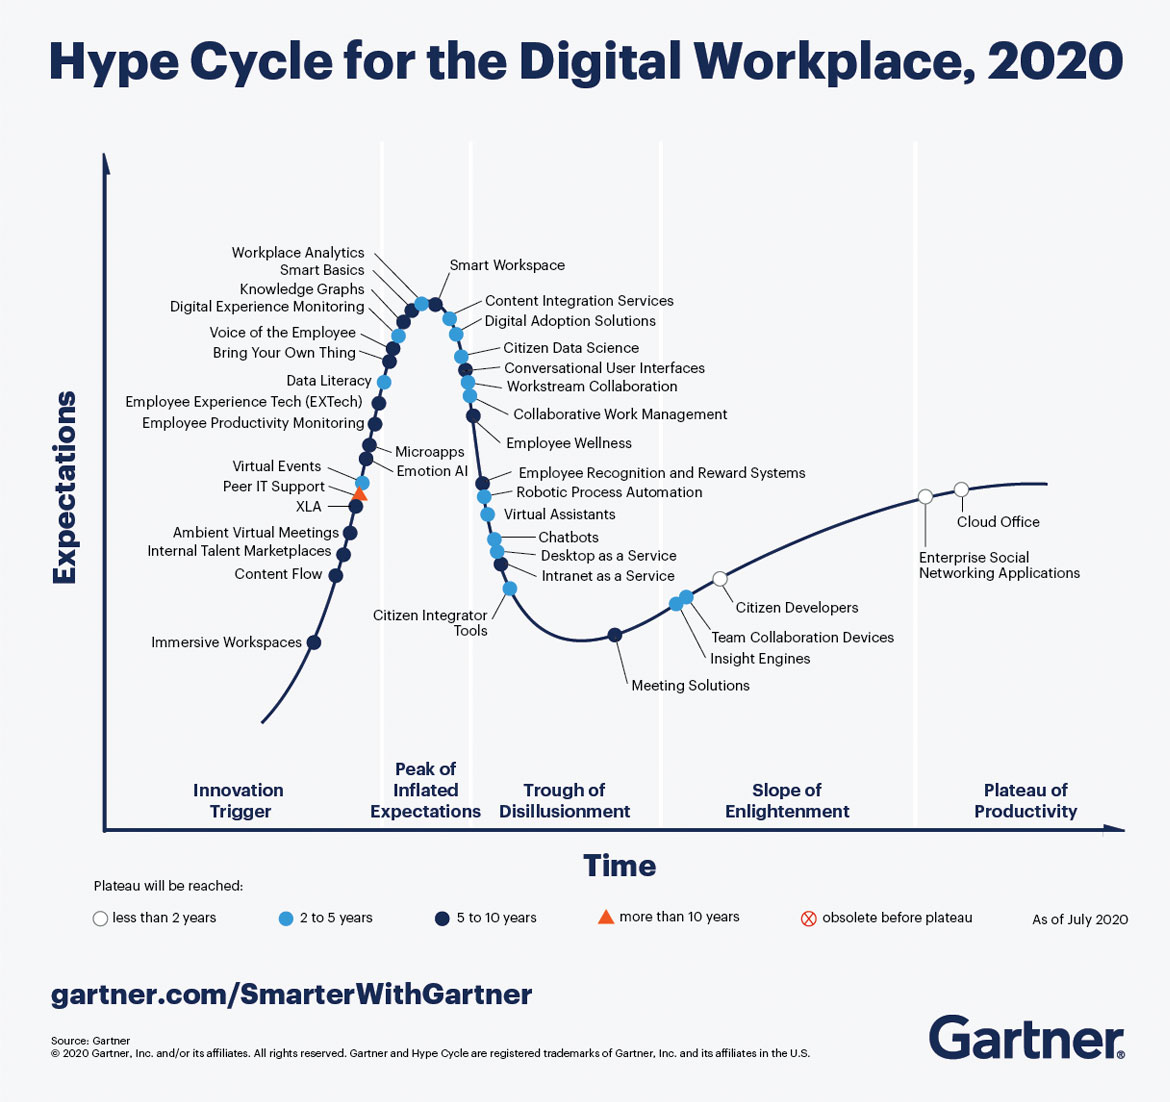 Gartner’s new Hype Cycle the Digital Workplace Roller Coaster